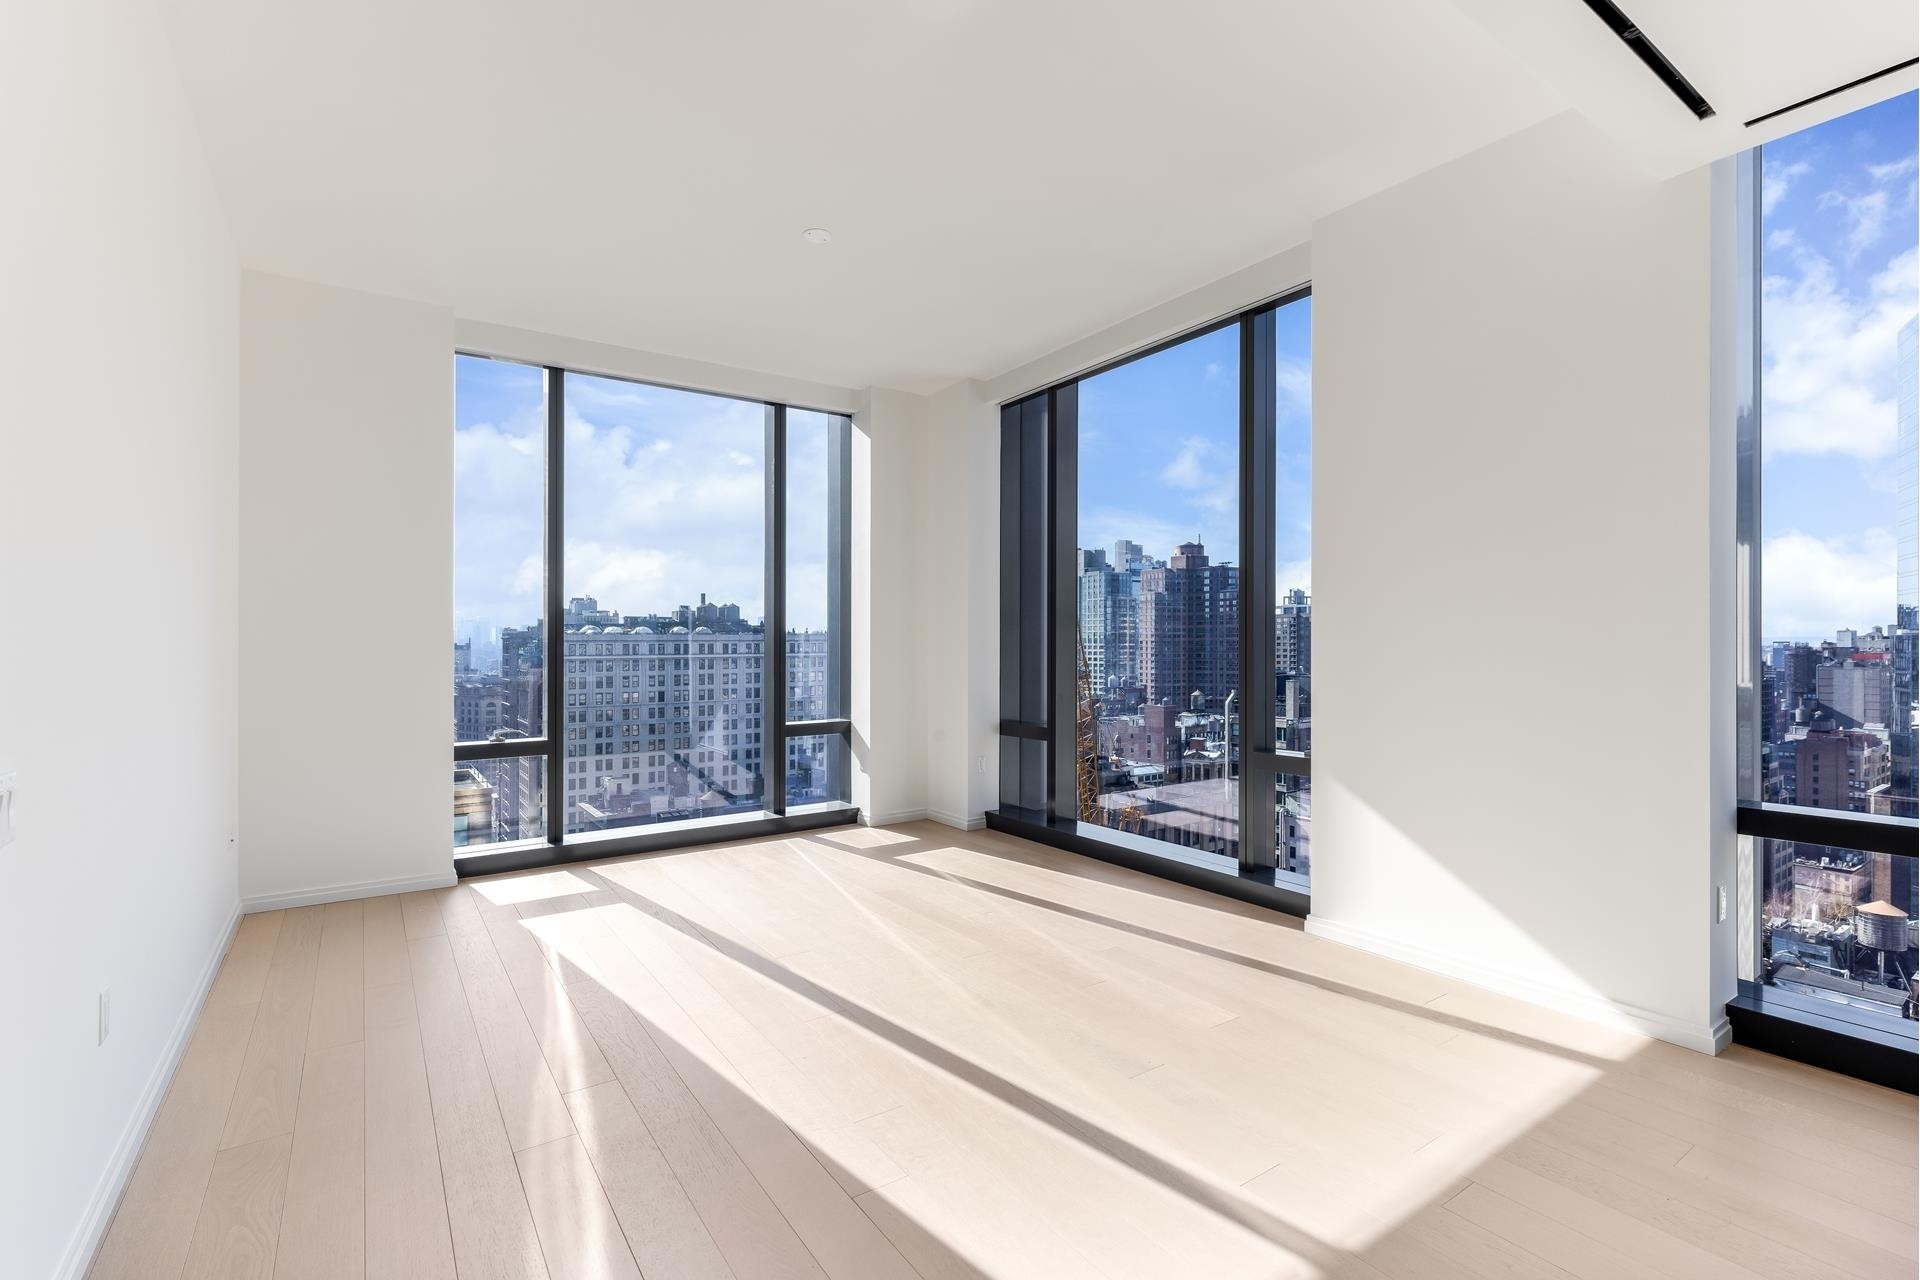 Condominium for Sale at 277 FIFTH AVE, 26D NoMad, New York, NY 10016